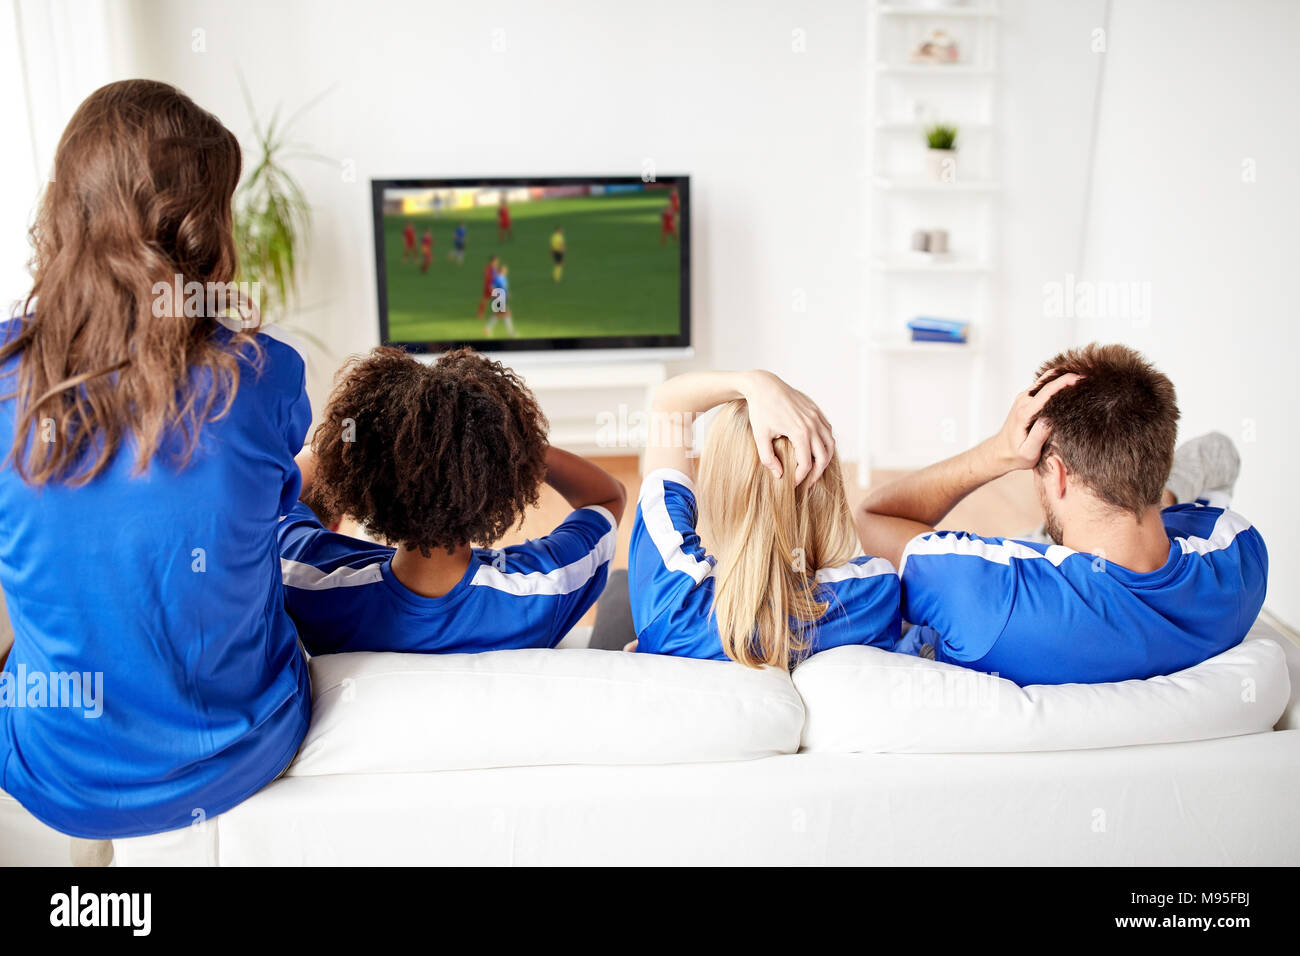 football fans watching soccer on tv at home Stock Photo